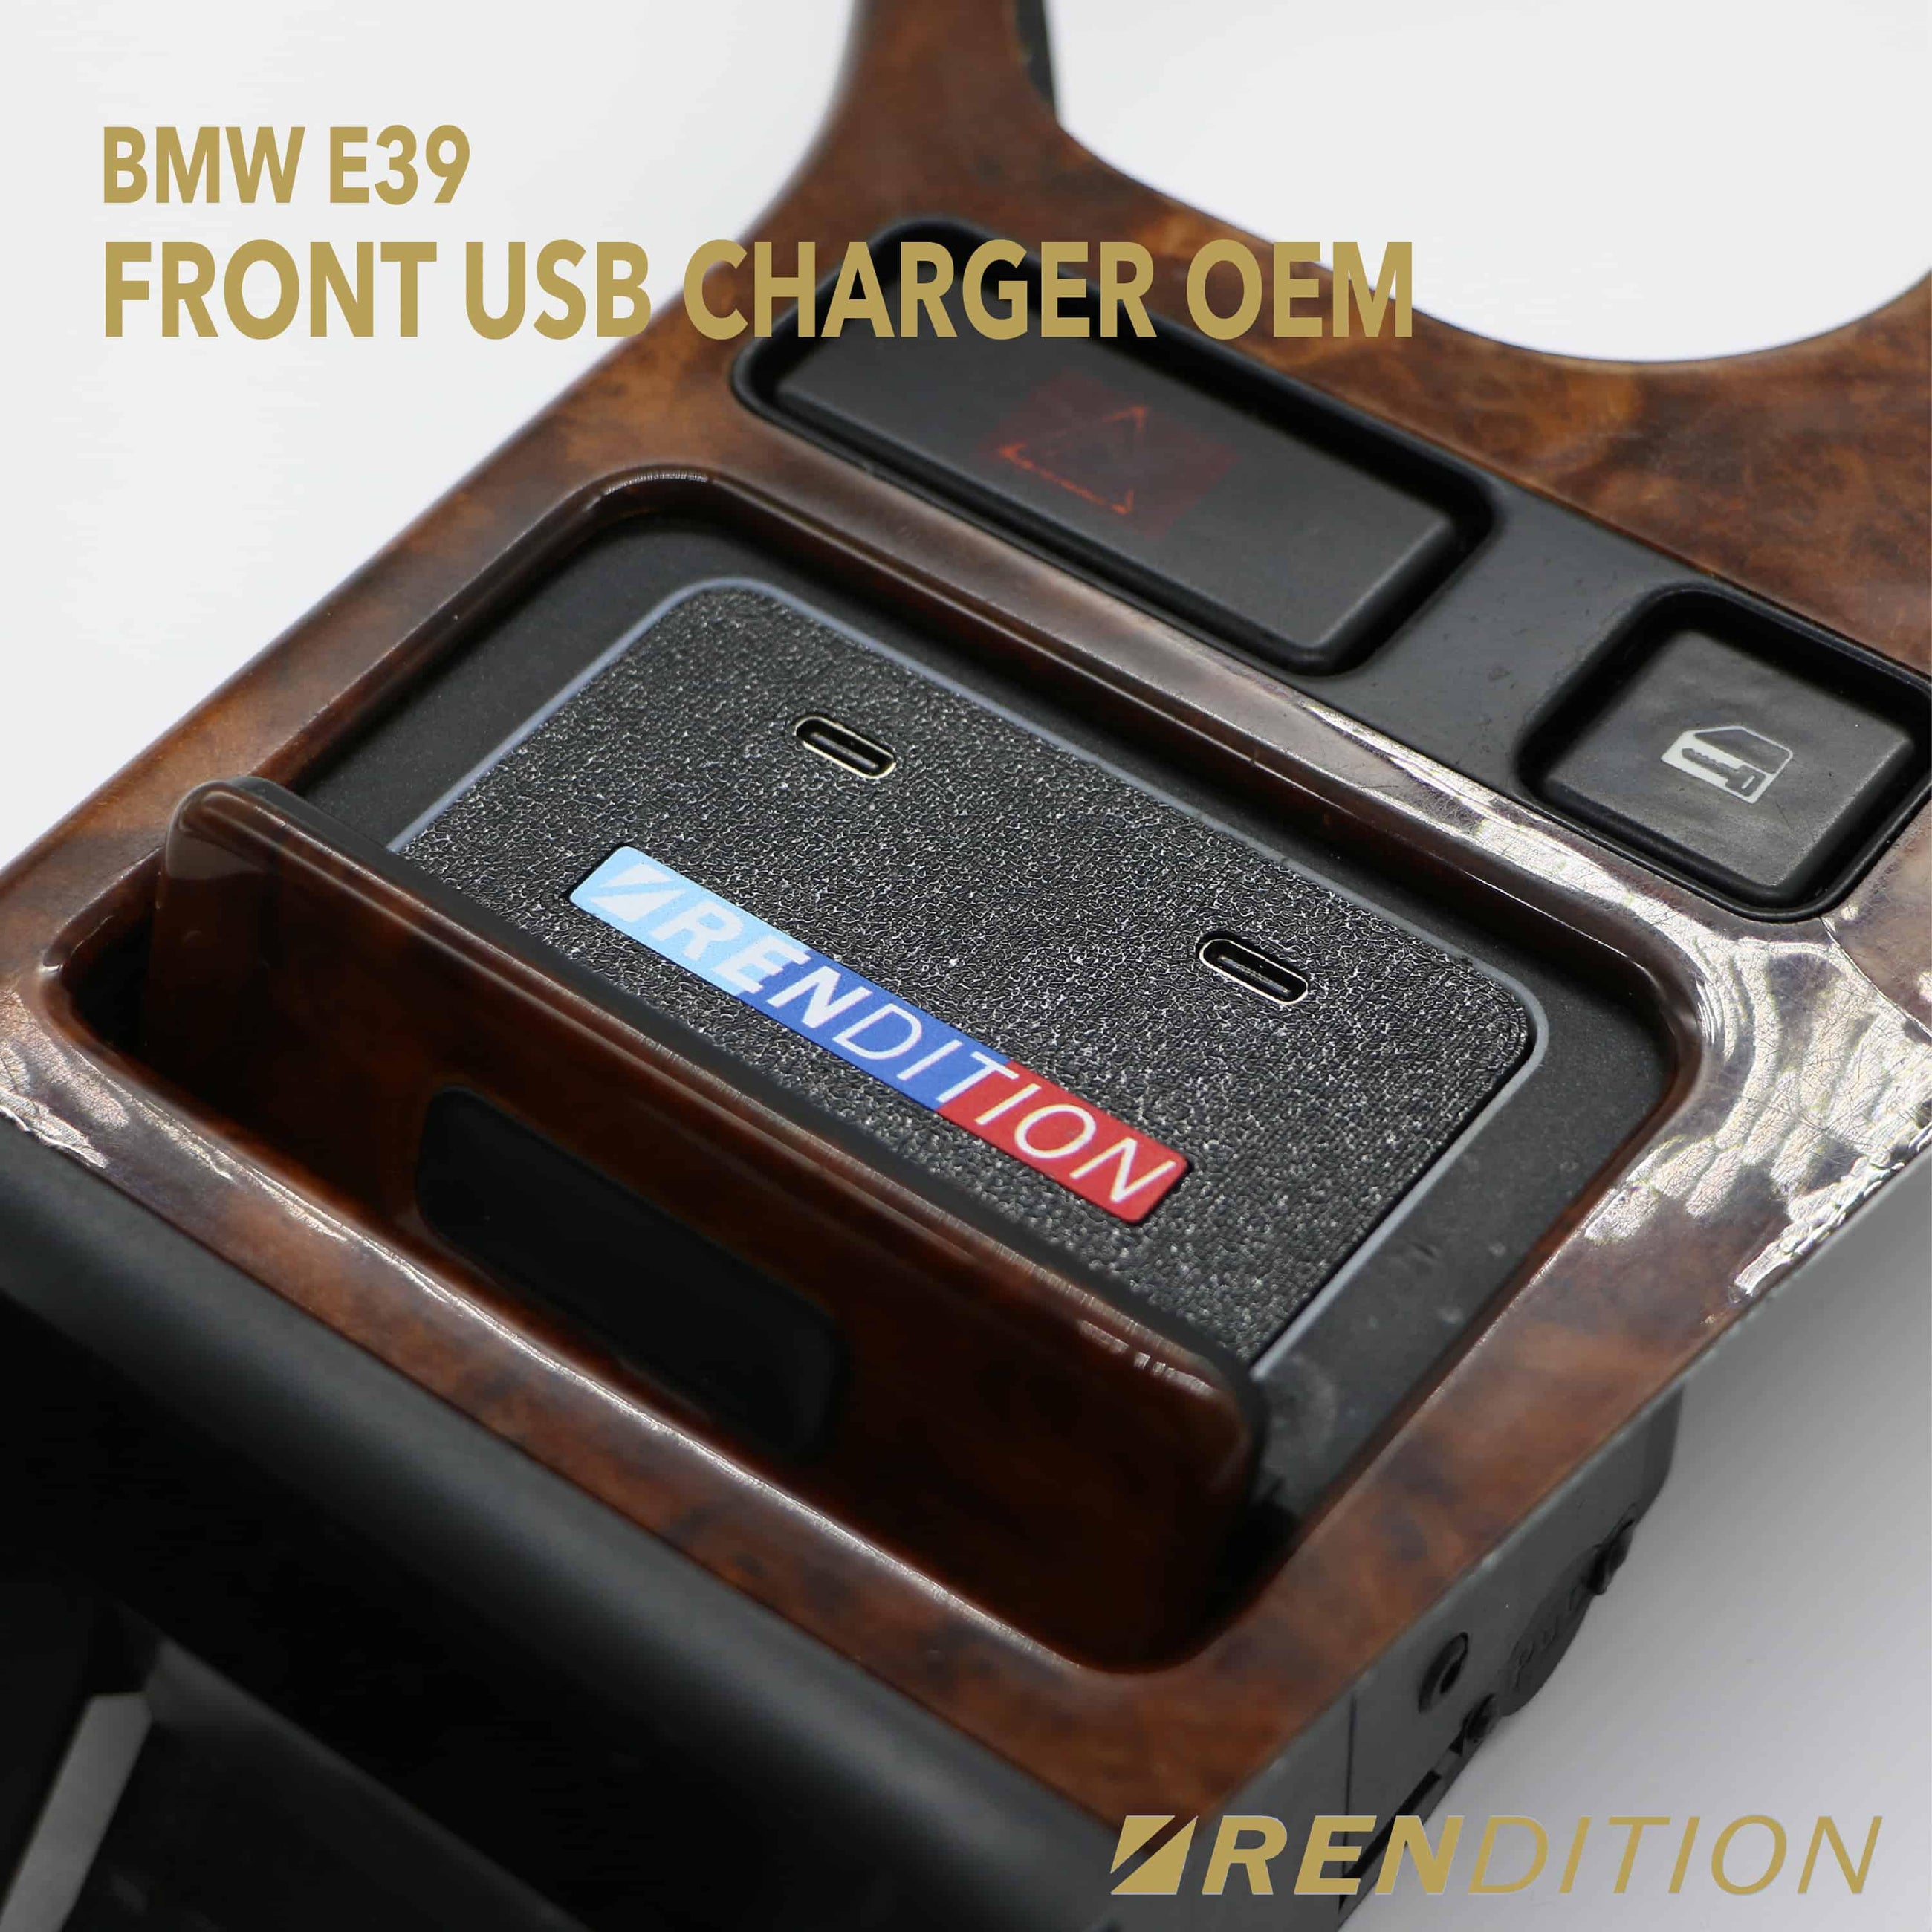 BMW E39 Front USB Charger Oem - K2 Industries